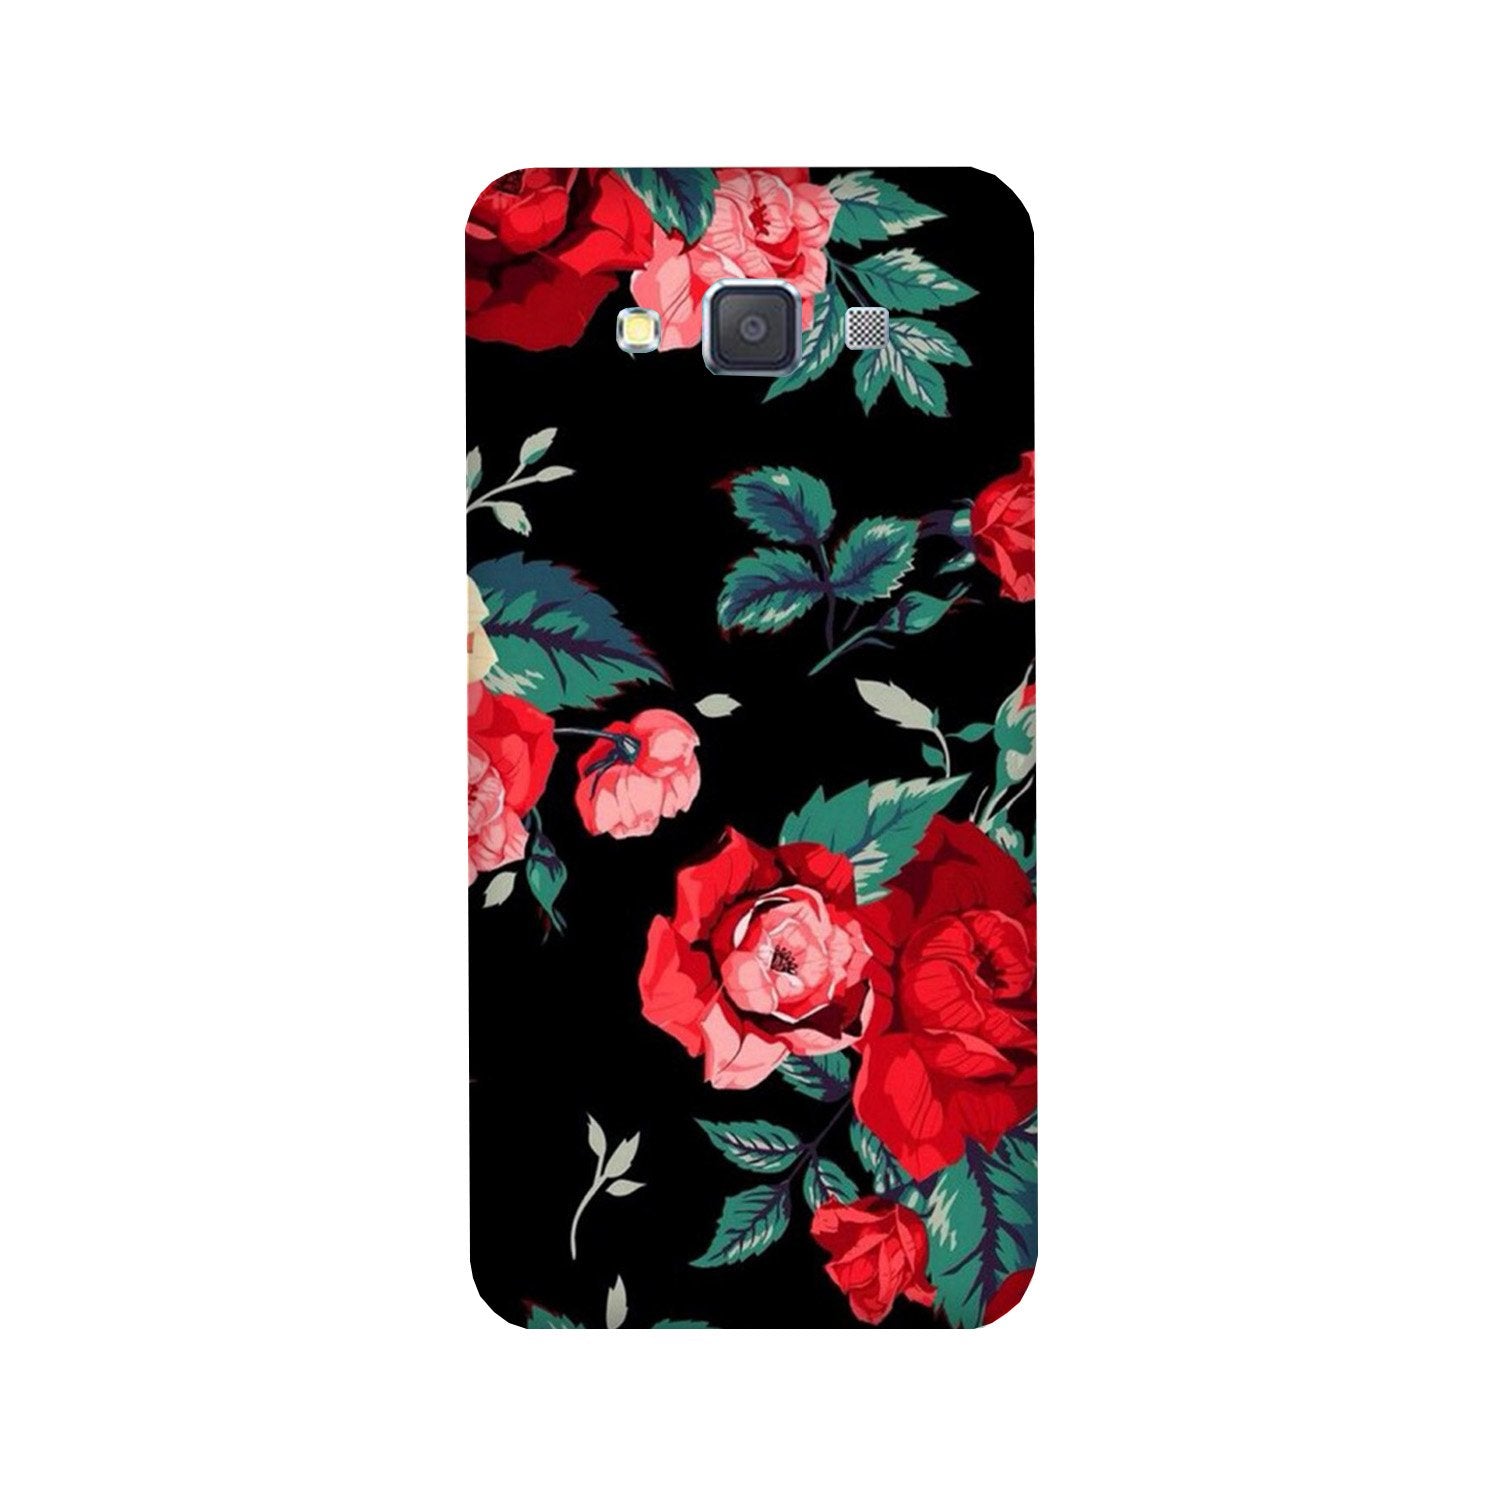 Red Rose2 Case for Galaxy A8 (2015)